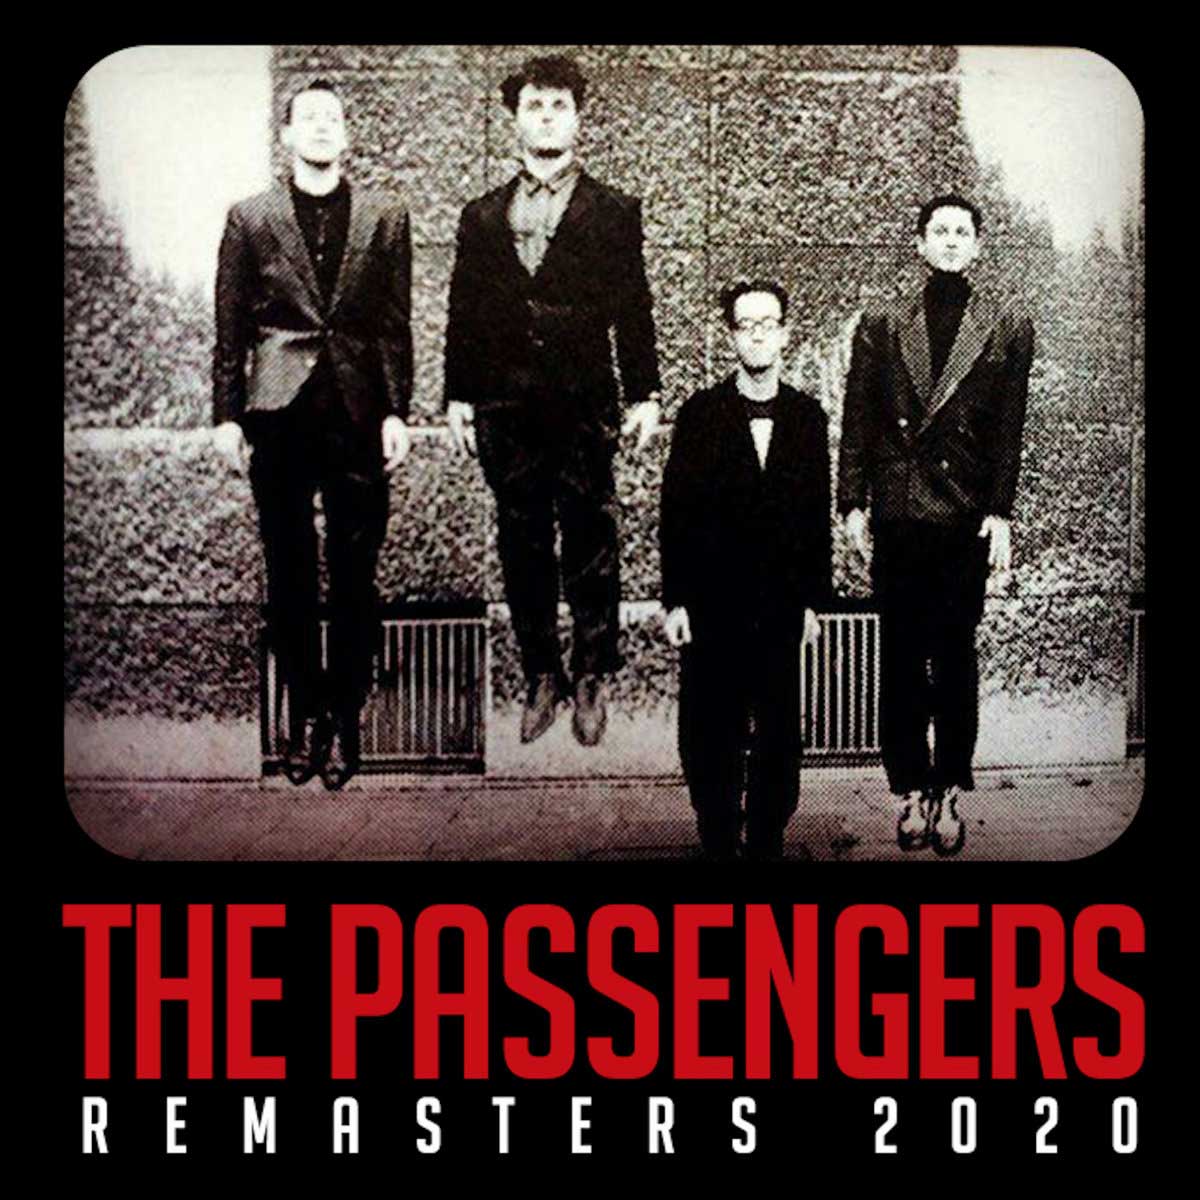 The Passengers Remasters 2020